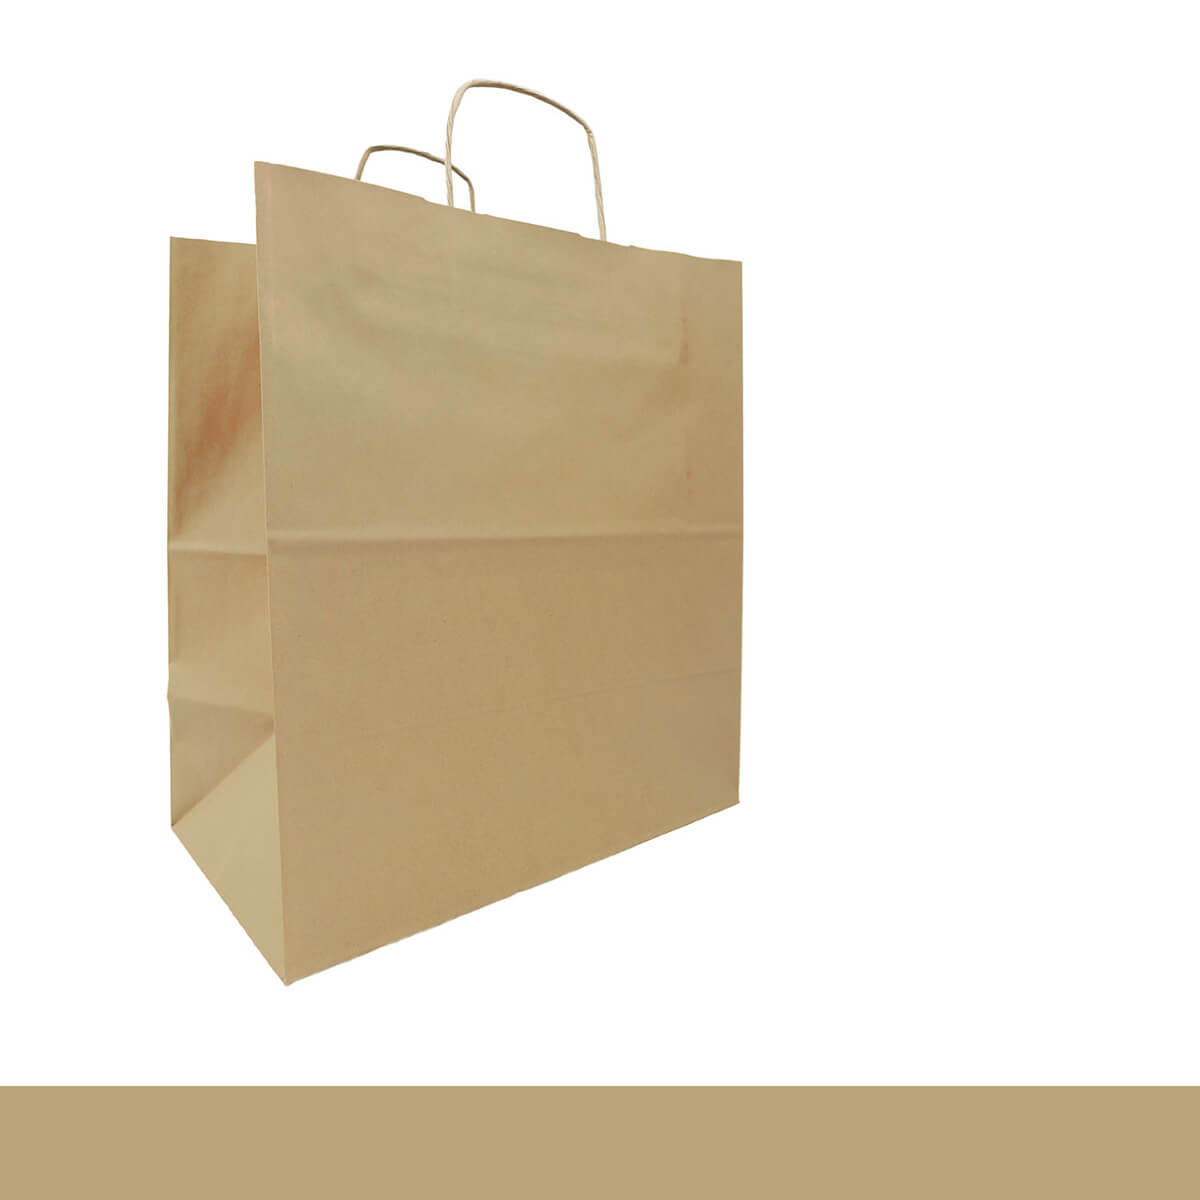 Paper bags with cord 41 x 32 x 12 cm - paper carrier bags brown